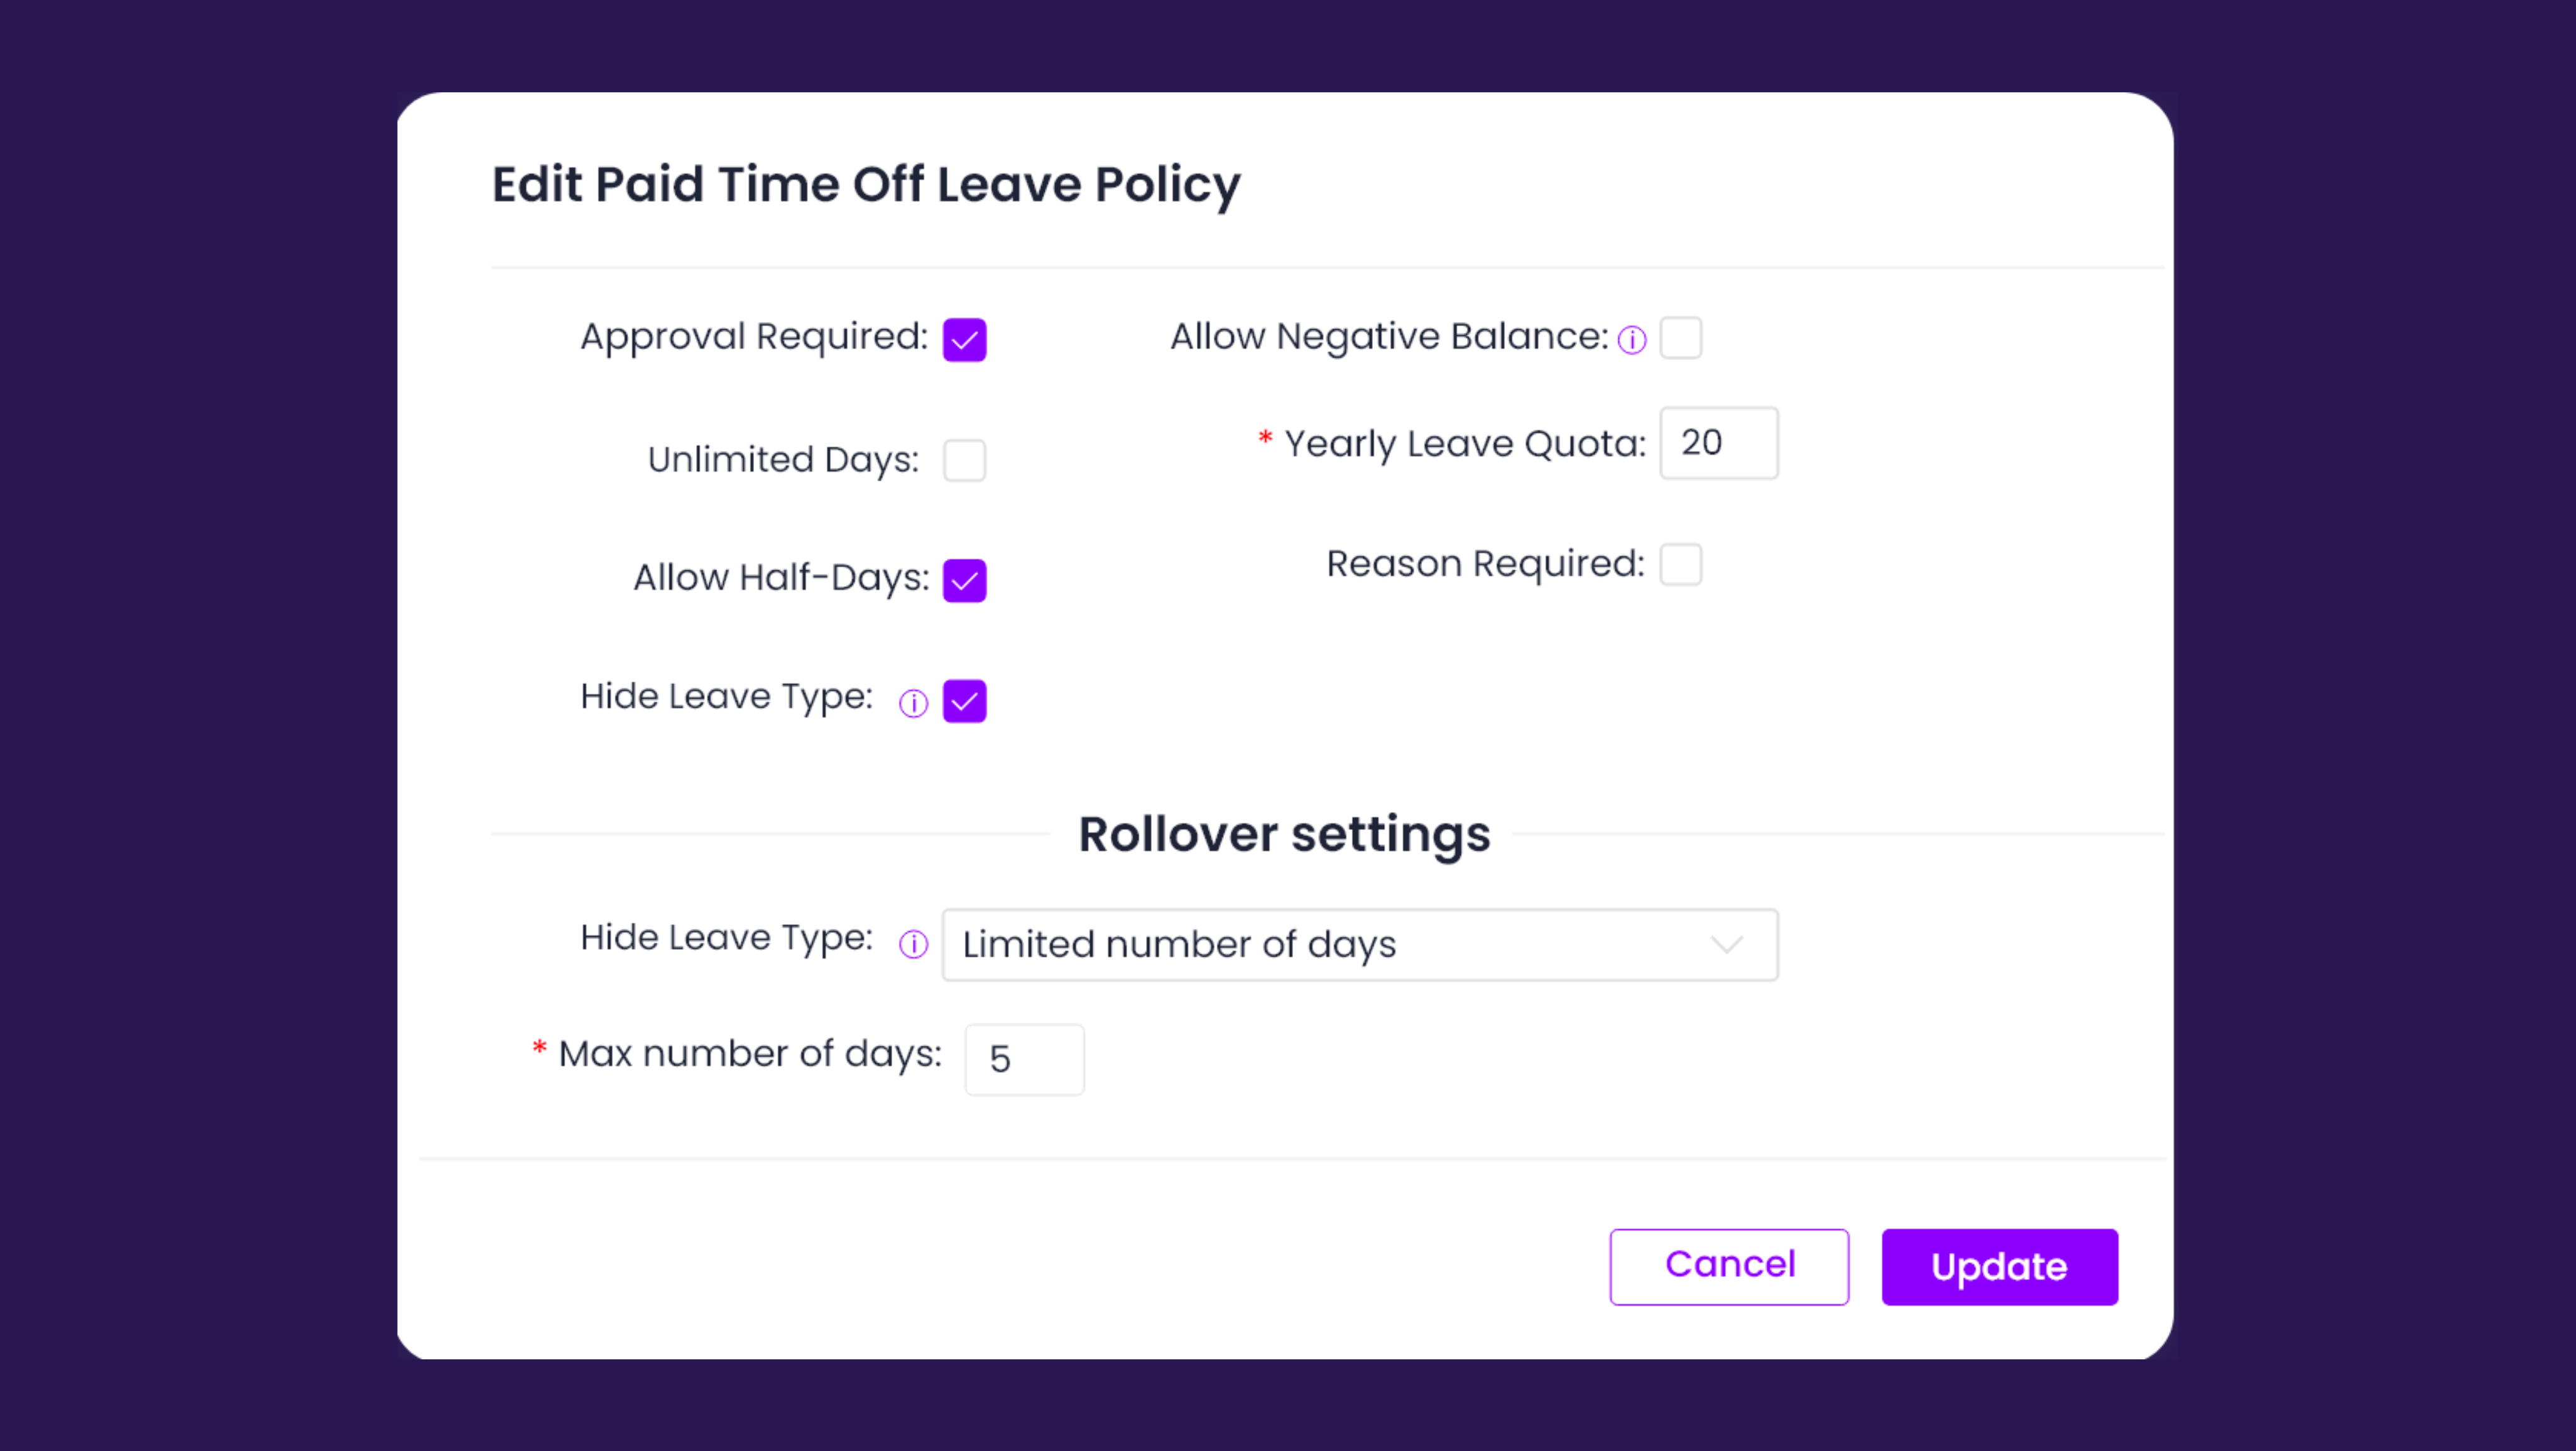 Customizable leave policies